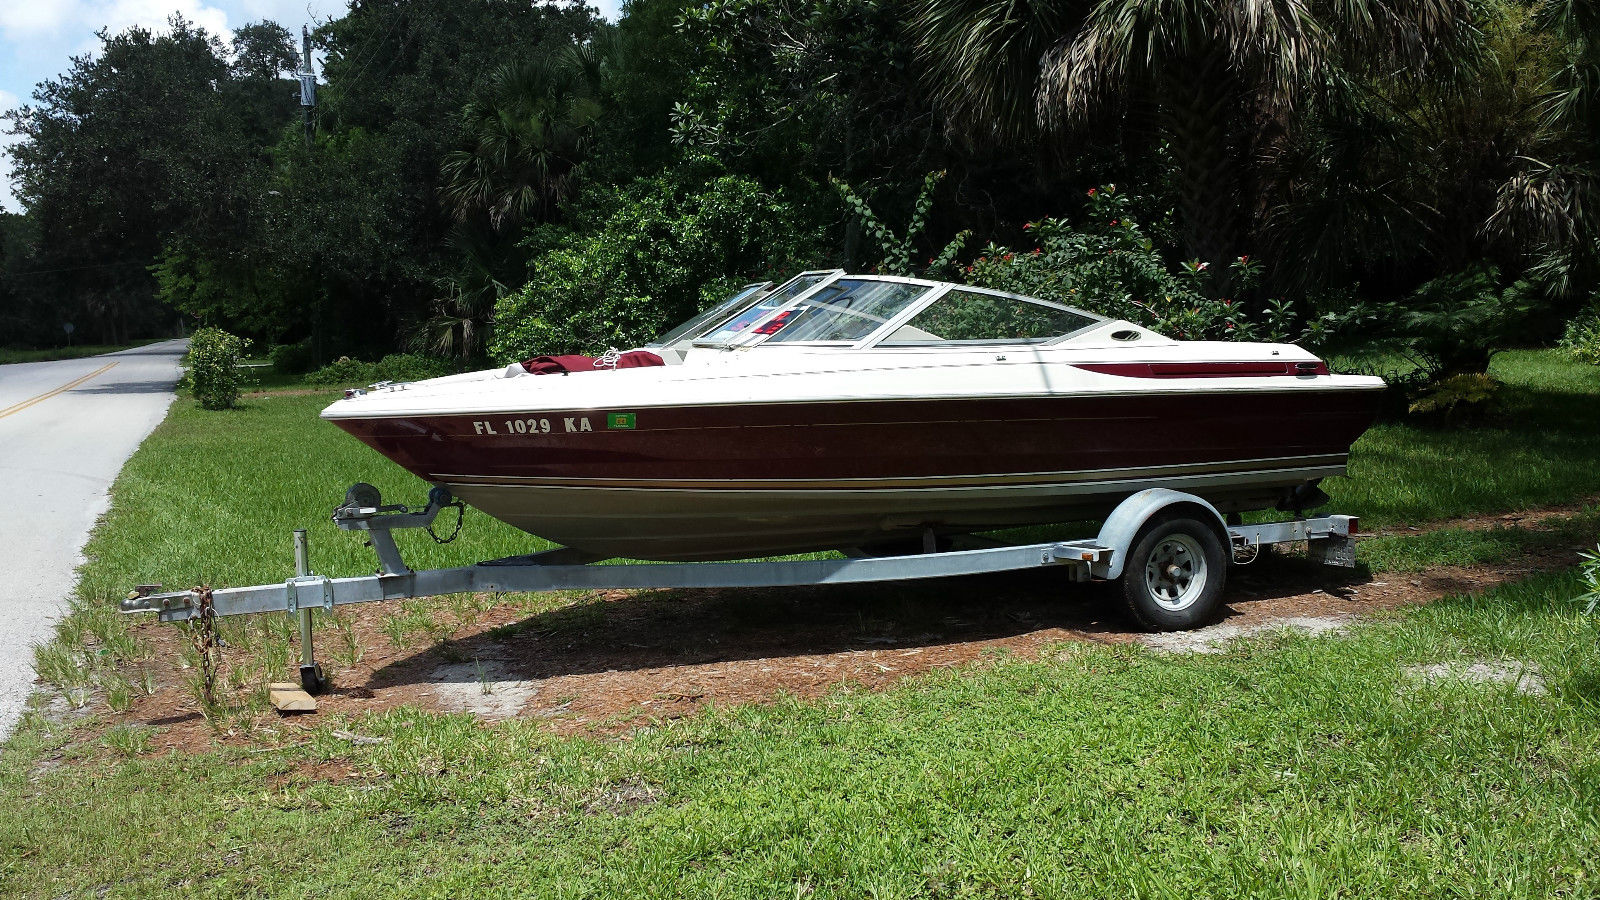 Maxum 17SR 1997 for sale for $3,800 - Boats-from-USA.com